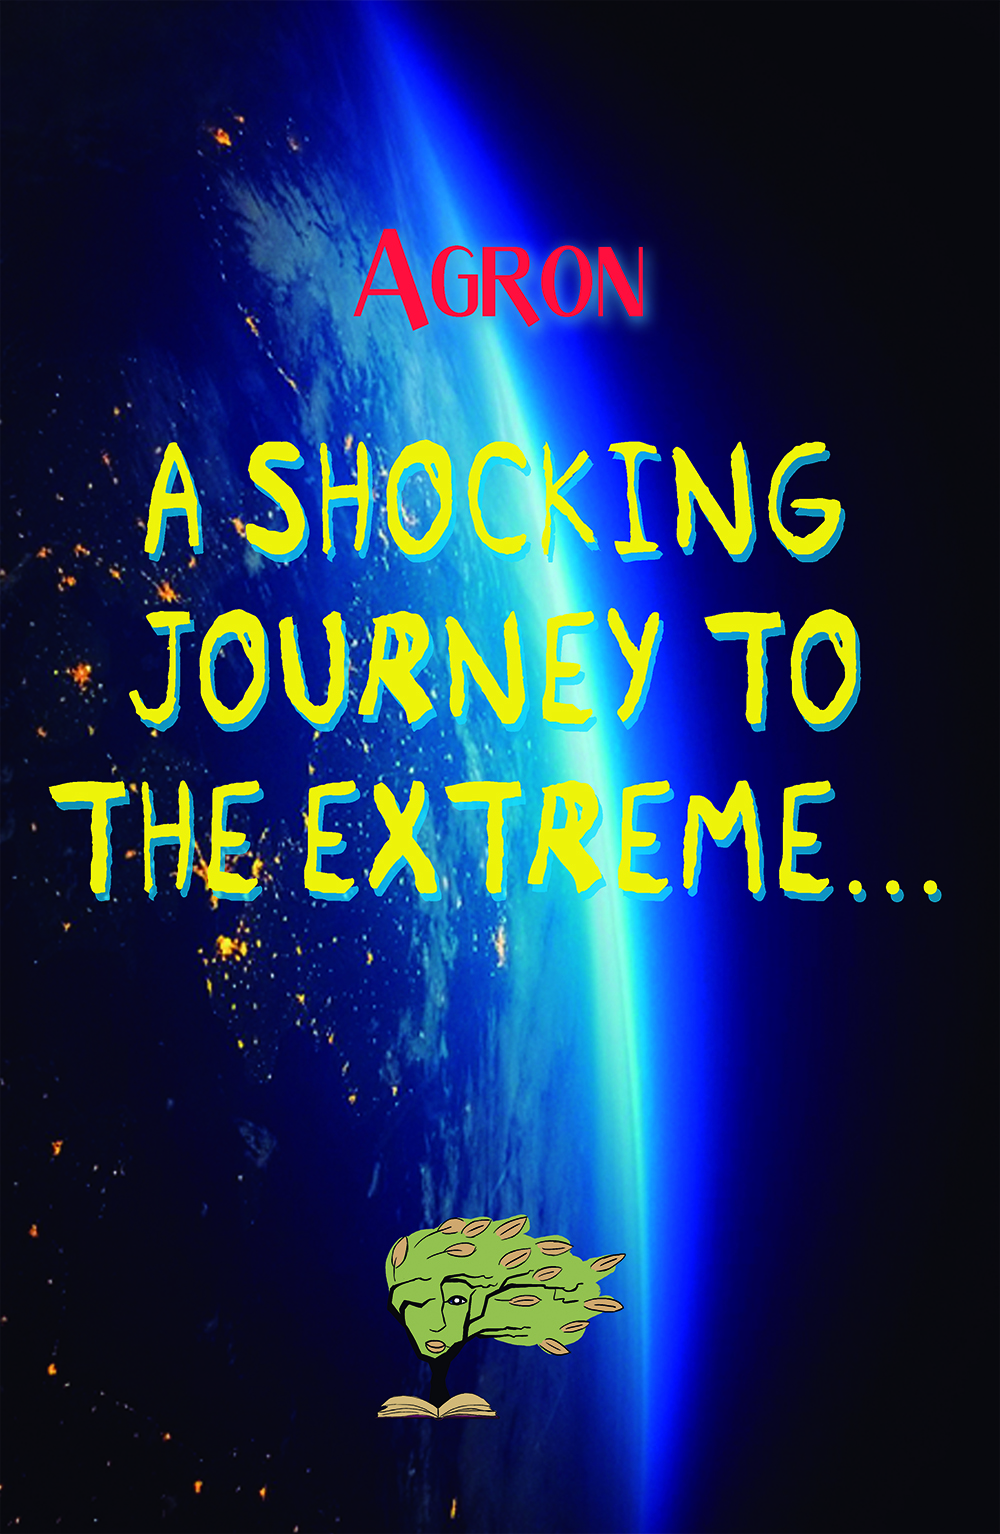 A shocking journey to the extreme